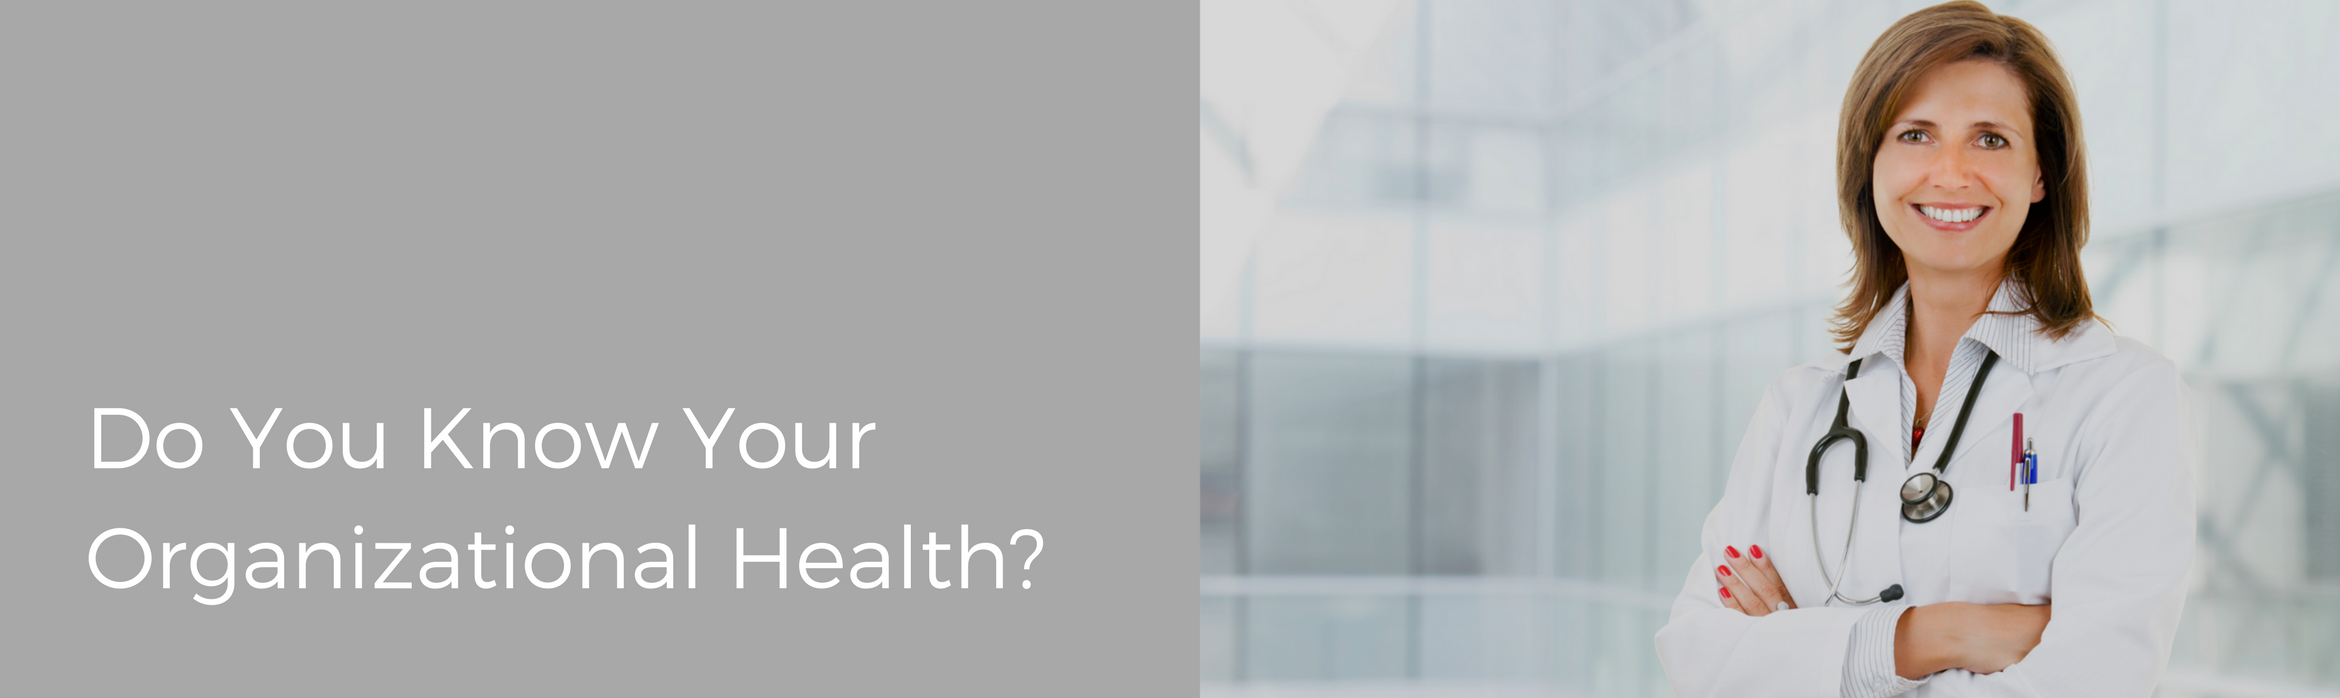 Do You Know Your Organizational Health?